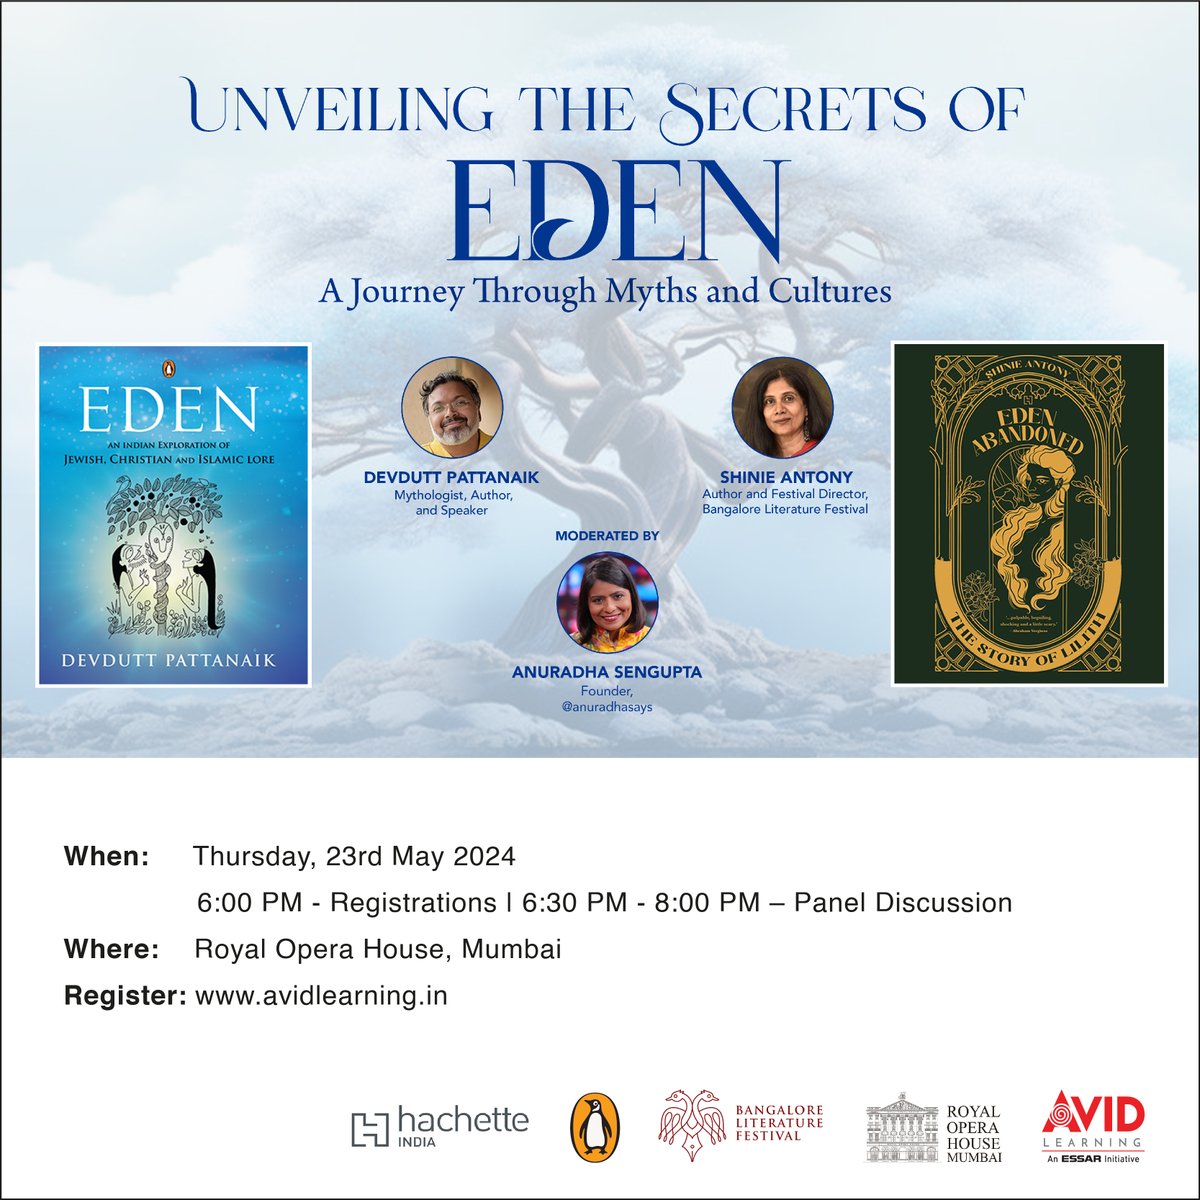 Avid Learning, @MumbaiOpera, @BlrLitFest, @PenguinIndia, & @HachetteIndia present “Unveiling the Secrets of Eden: A Journey Through Myths and Cultures.” Join us at the Royal Opera House Mumbai on Thursday, May 23rd at 6 pm! @devduttmyth @shinieantony @anuradhasays